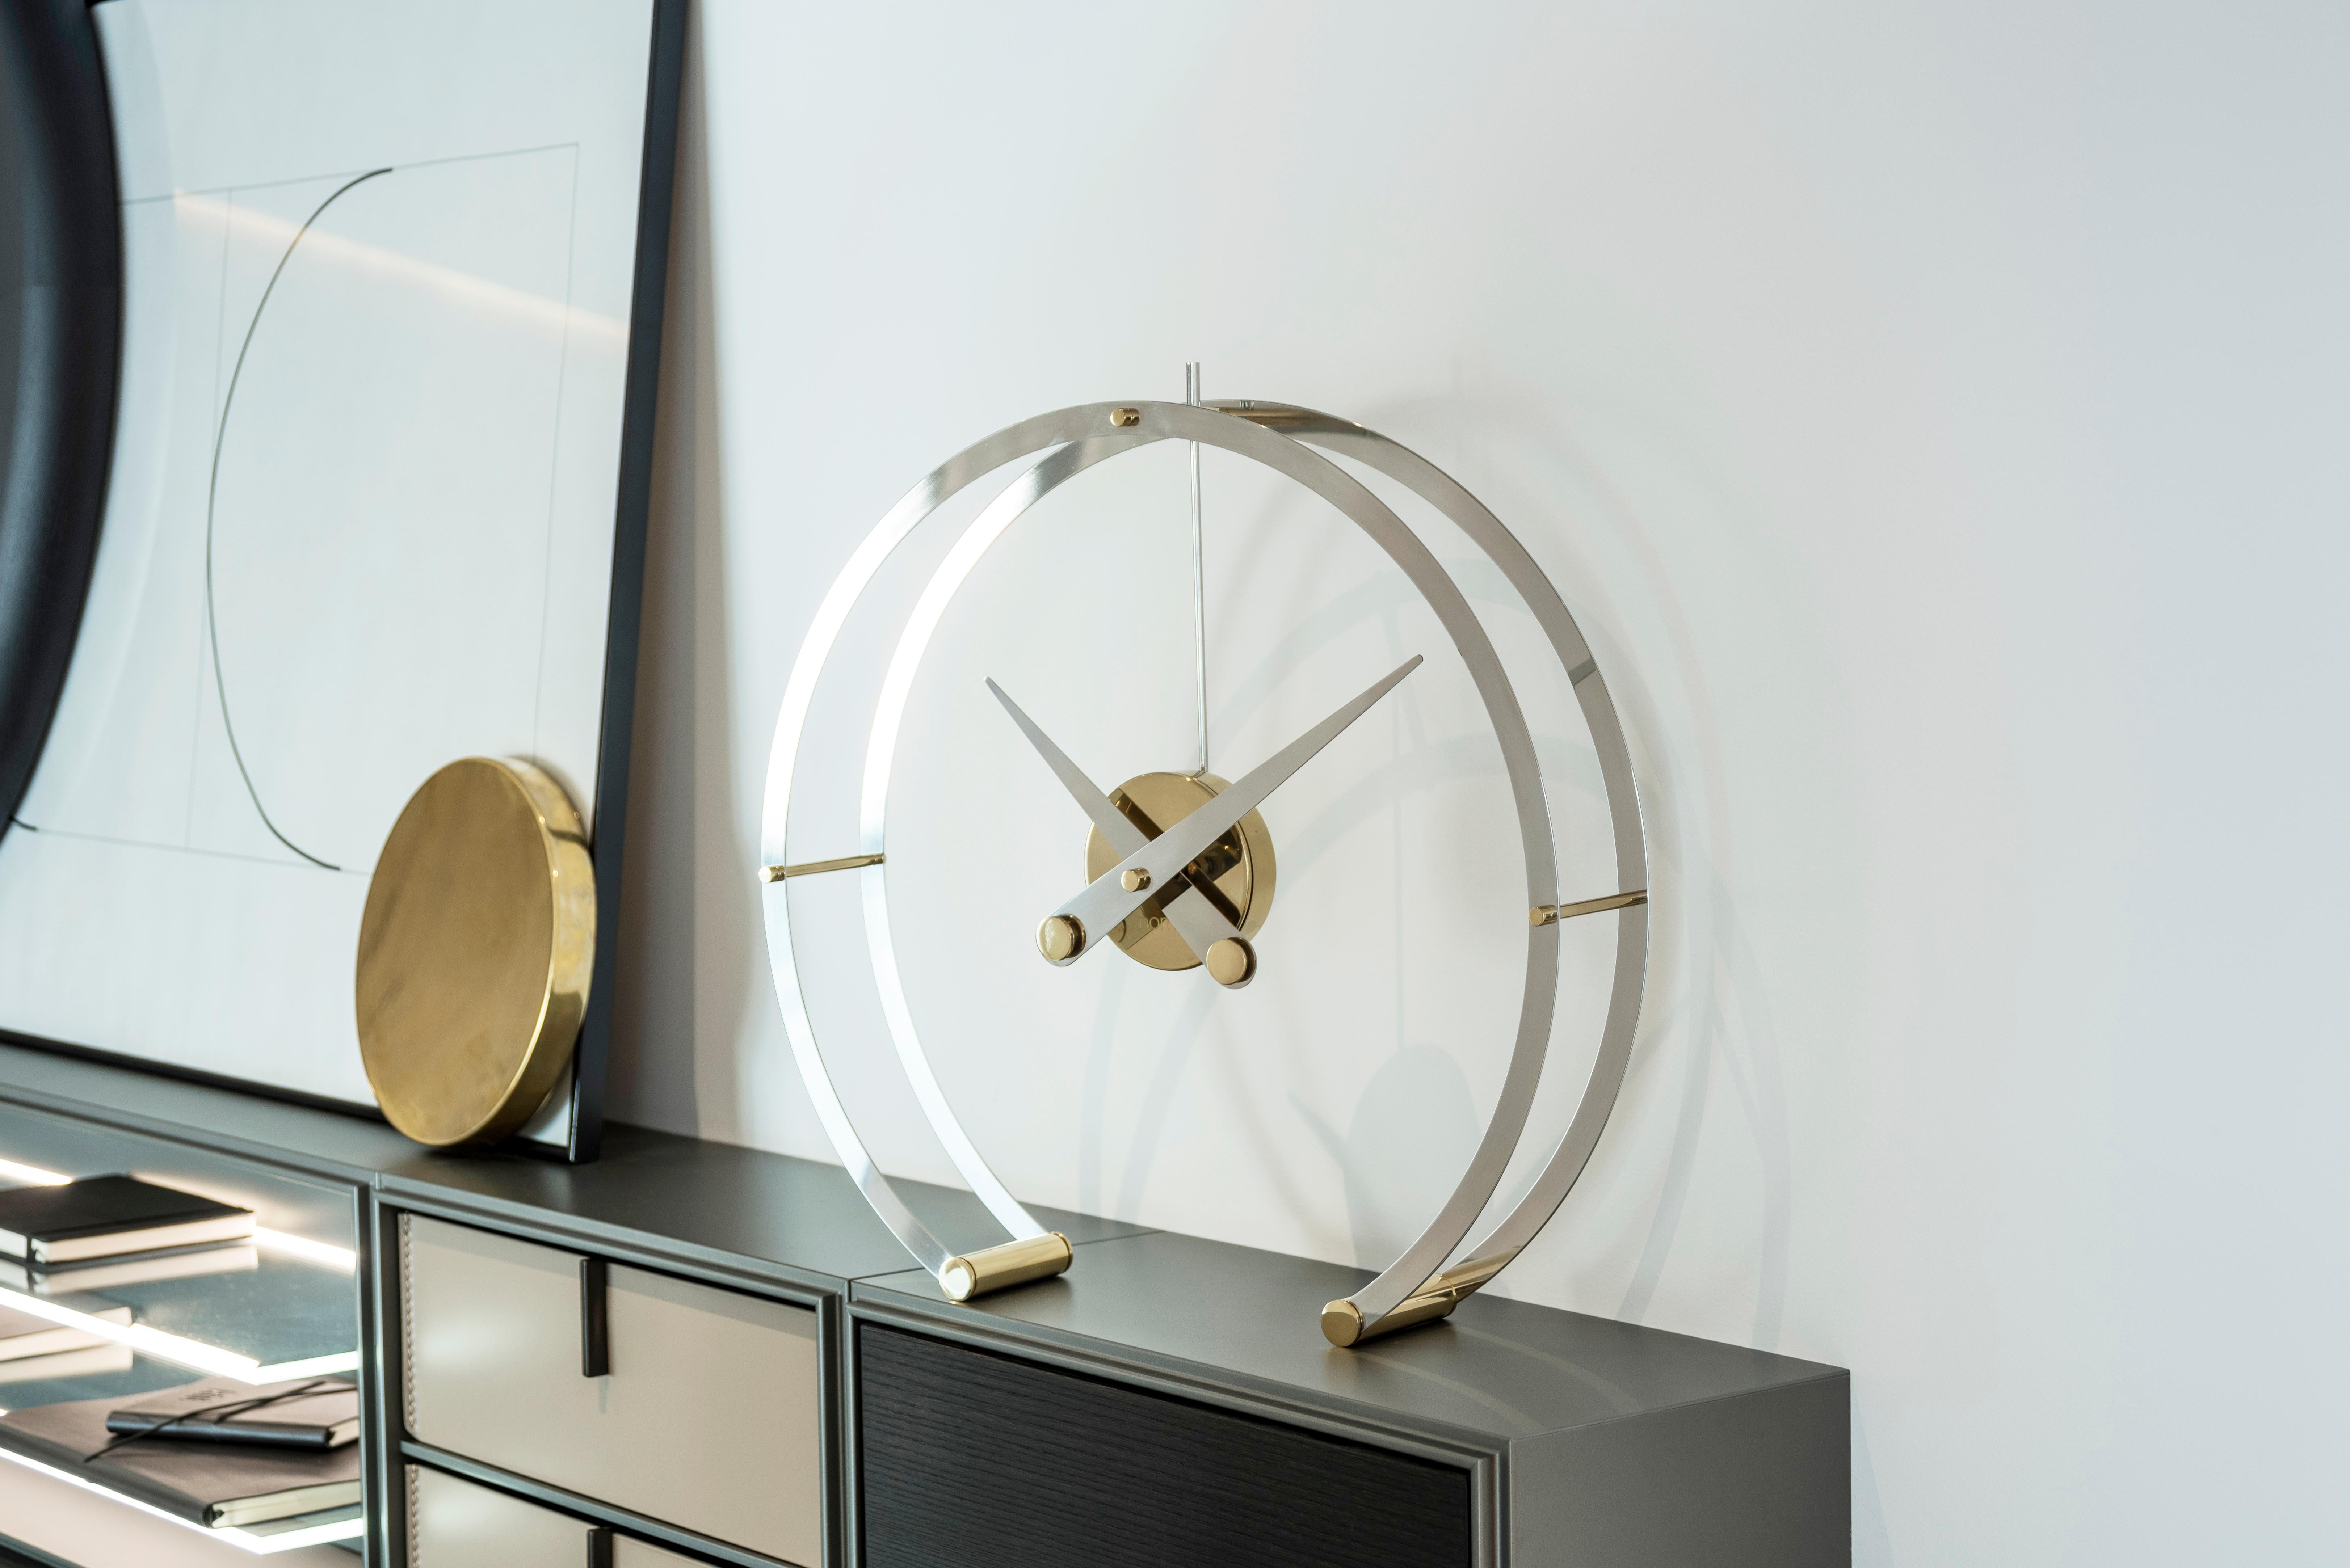 Reinventing with its structures Nomon brings you a clock from the desktop collection with an innovative and elegant design.

The Omega I Clock impresses by keeping a clock suspended in the air while losing its depth by removing unnecessary items